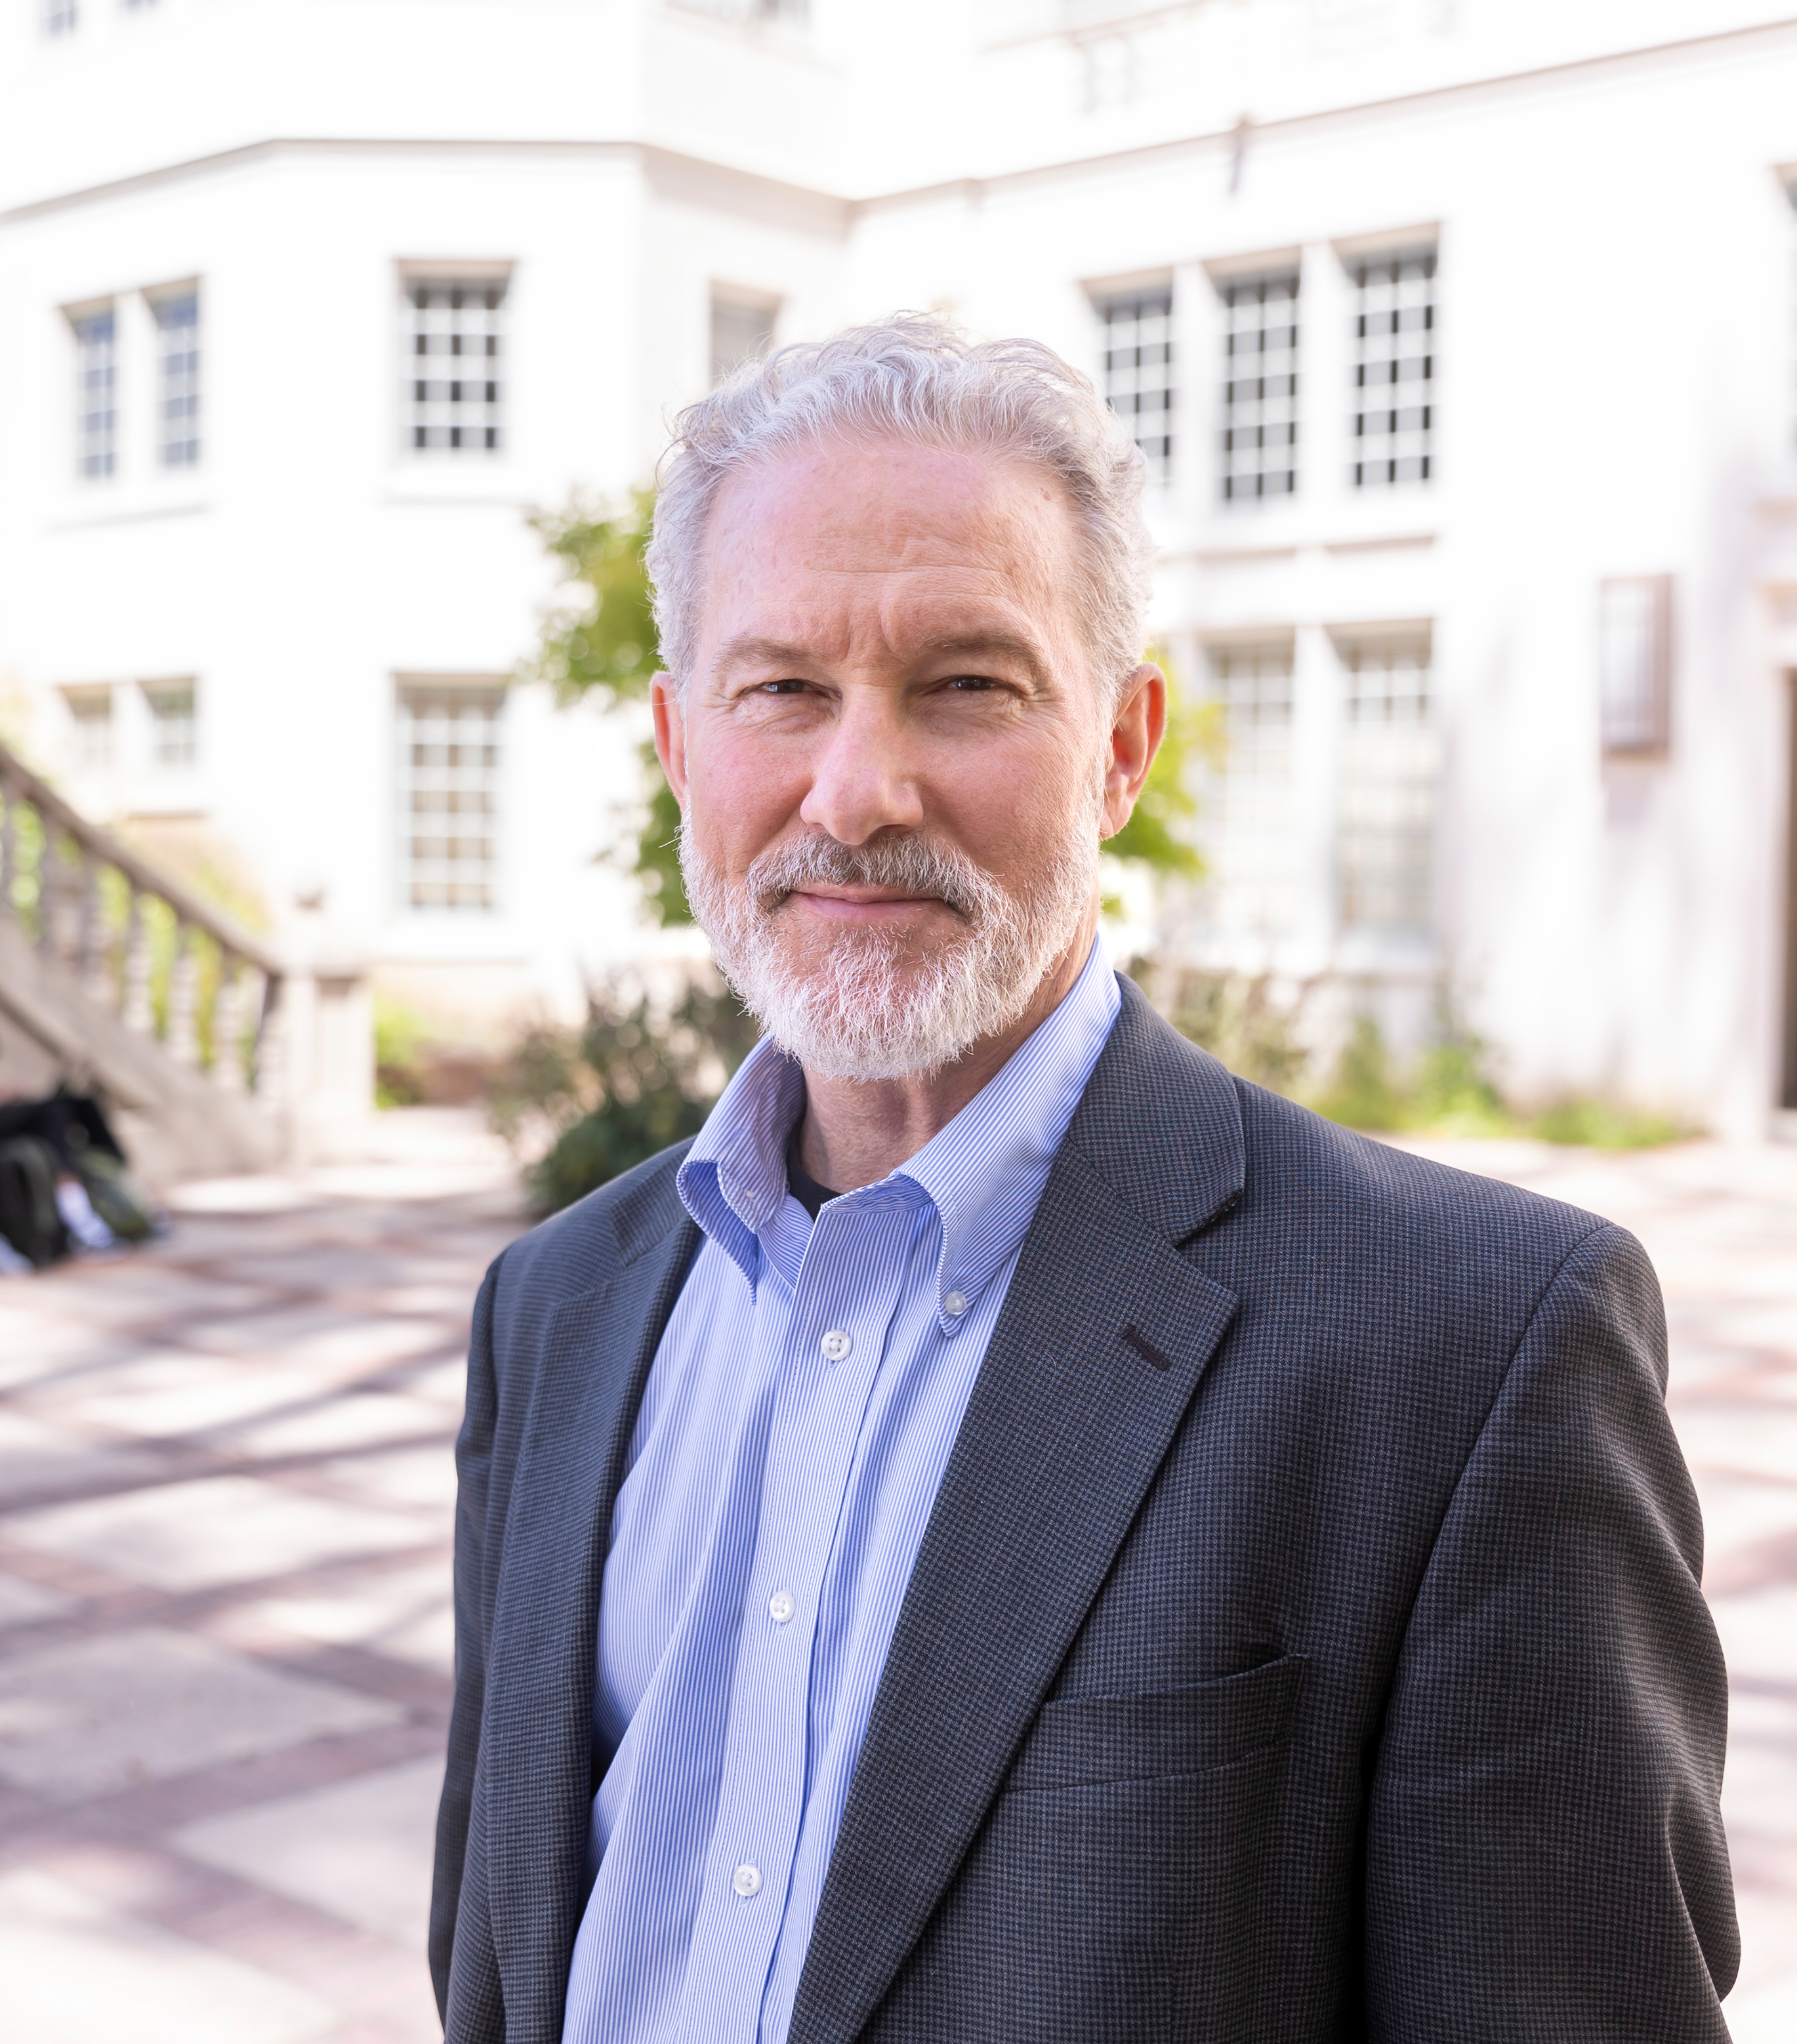 White male with white hair and a white beard smiles at camera on Berkeley campus